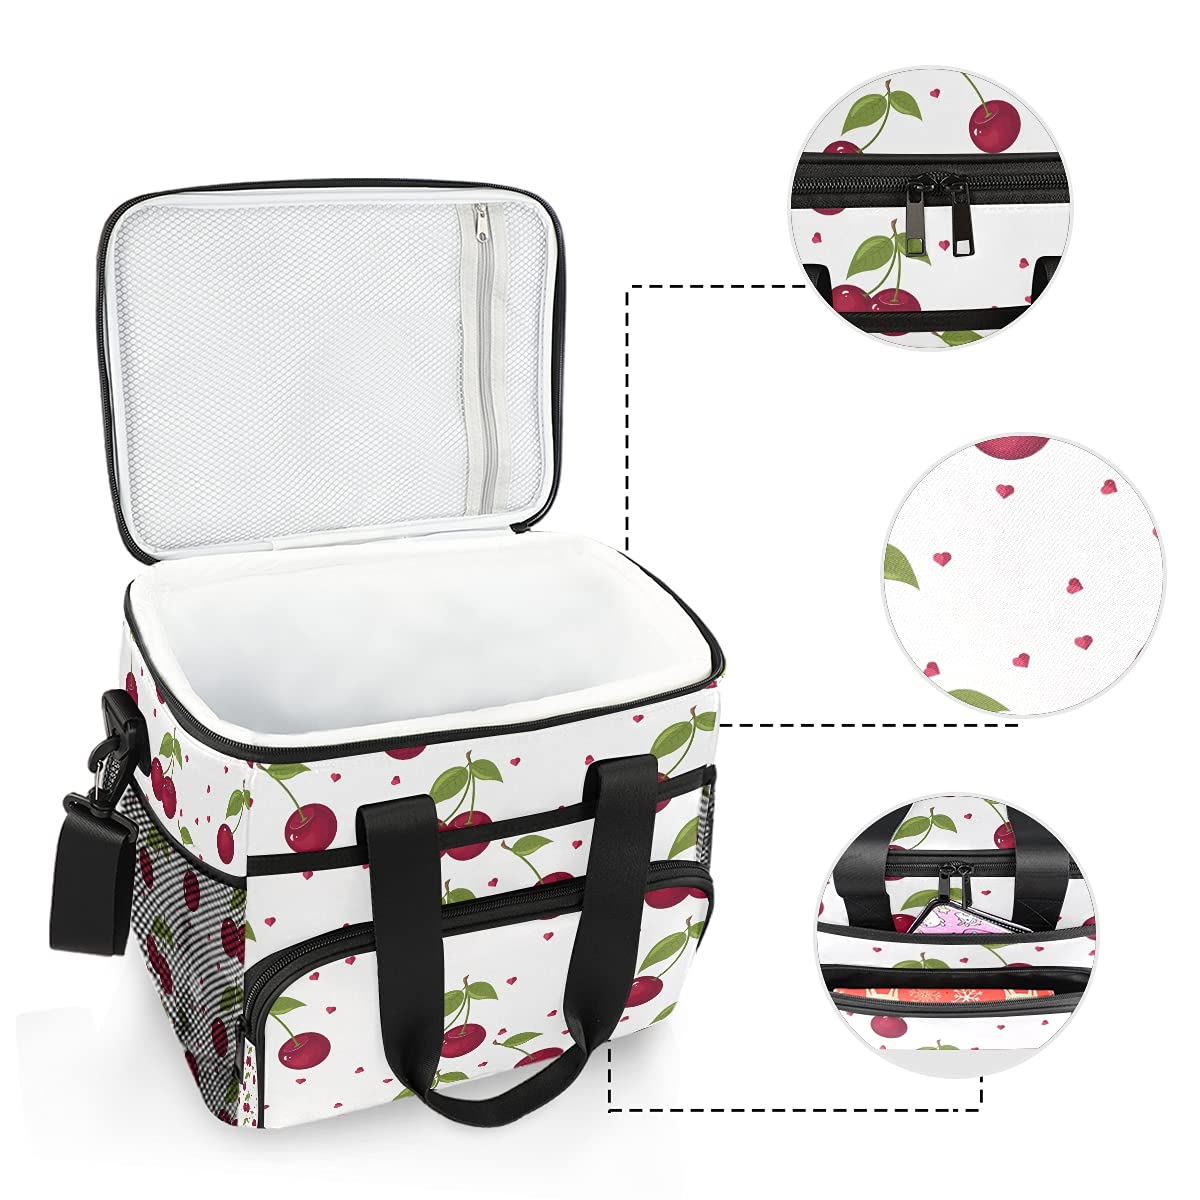 HMZXZ Large Cooler Lunch Bag Cute Cherry Pattern 24-Can (15L) Insulated Lunch Box Soft Leakproof Cooler Cooling Tote Bag for Adult Men Women Camping, Picnic, BBQ